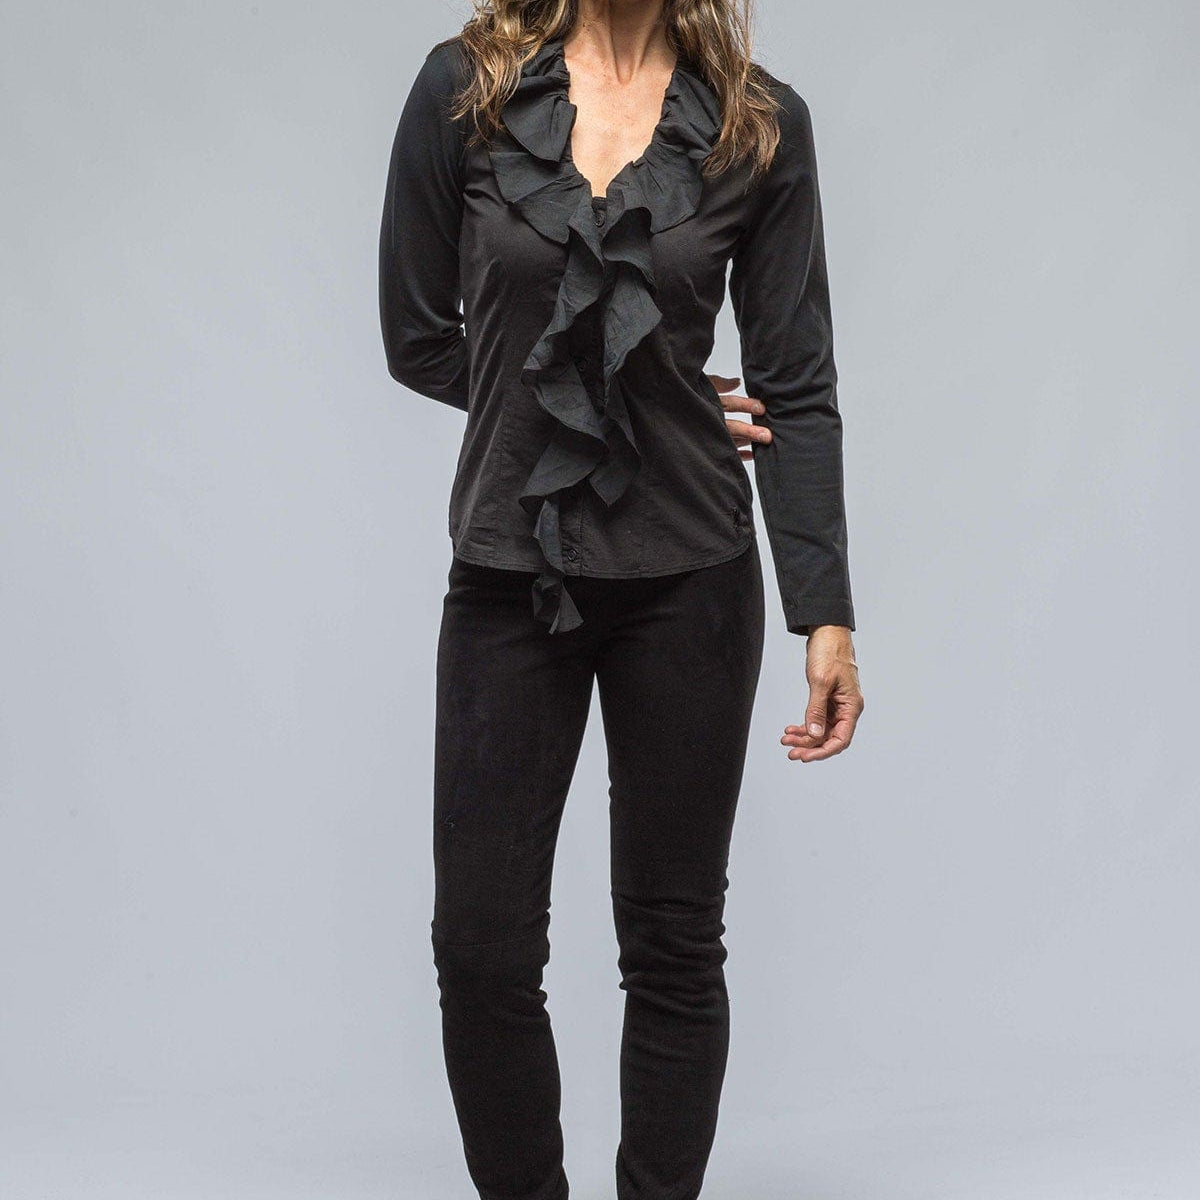 Monica V-Neck Ruffle Front Blouse In Black - AXEL'S